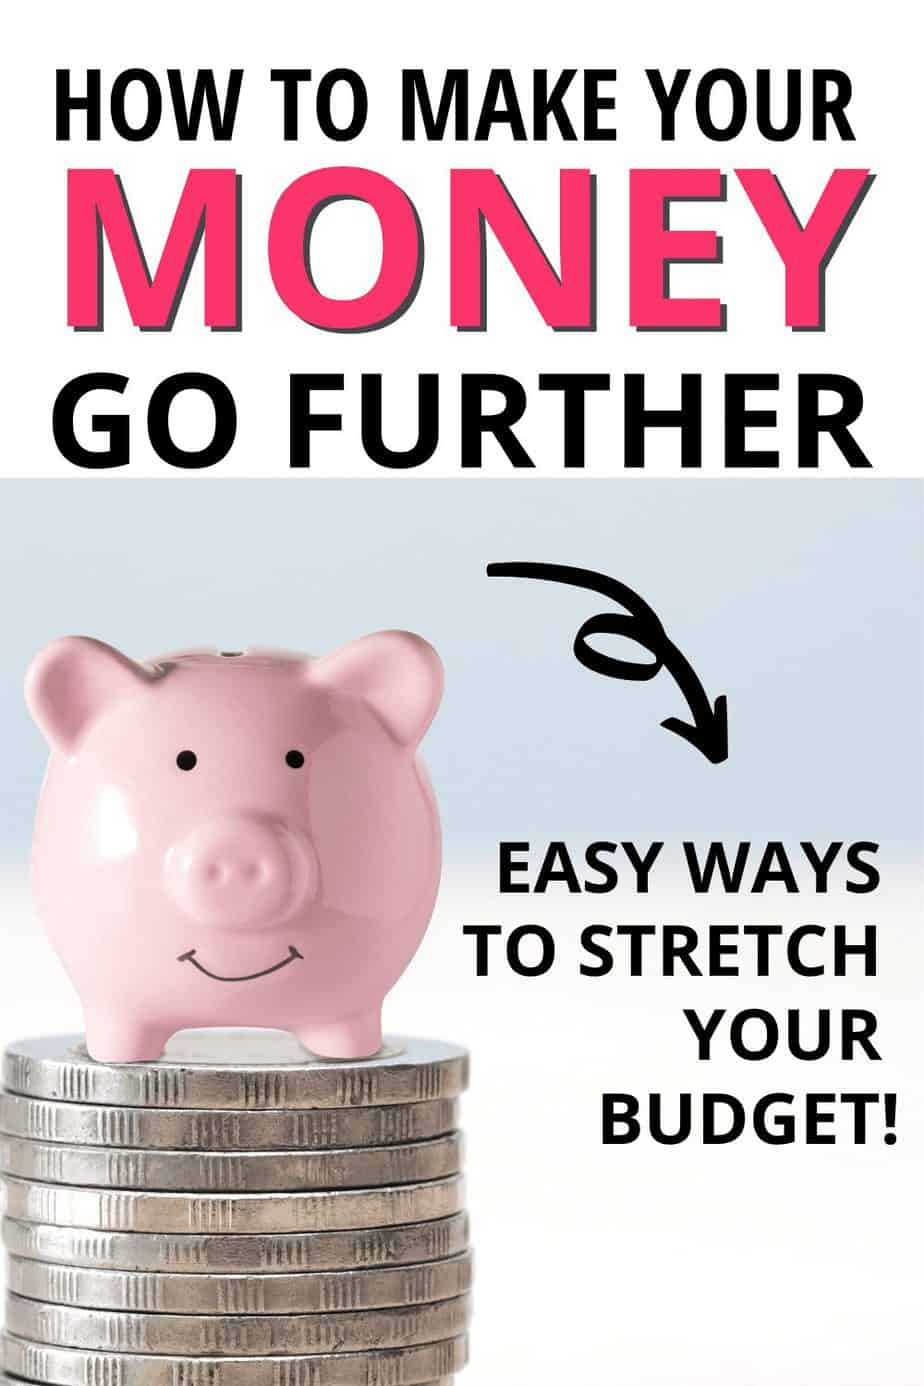 How to make your money go further 